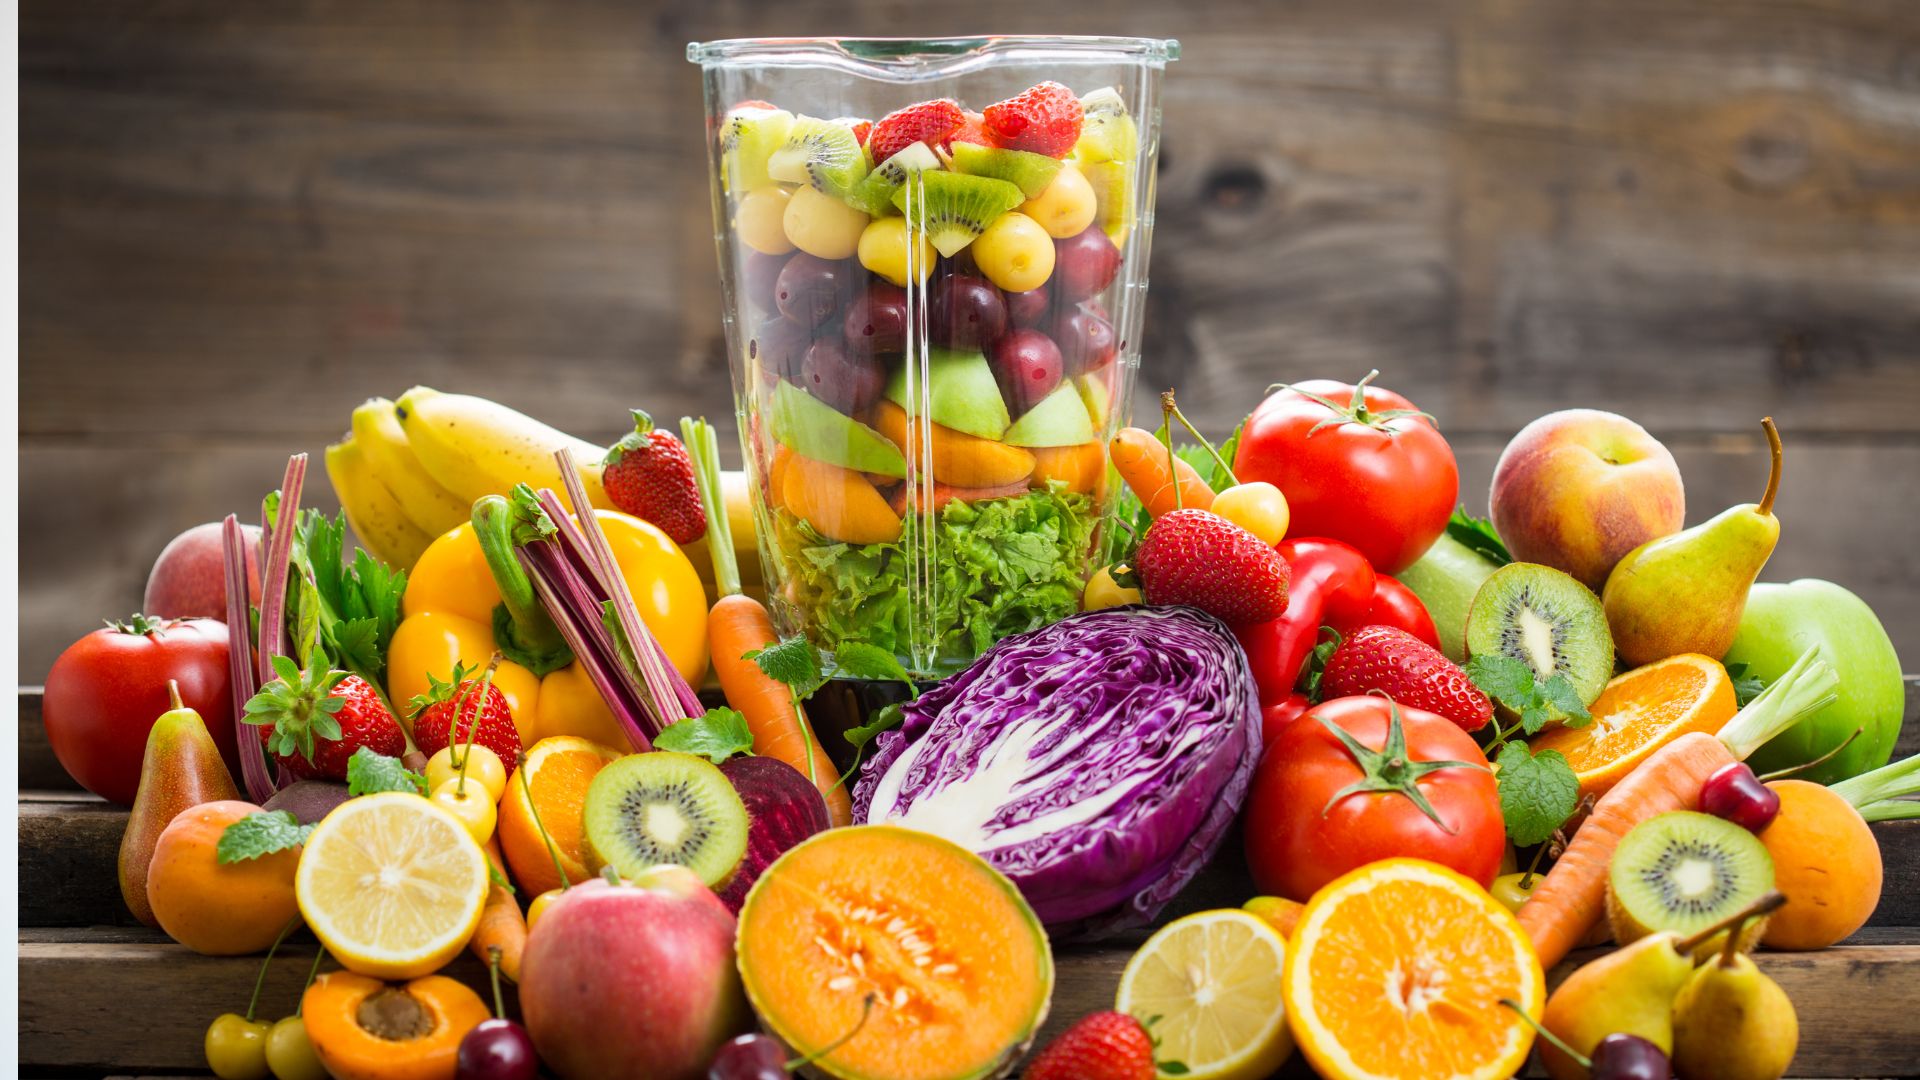 Fresh fruits and vegetables in the blender